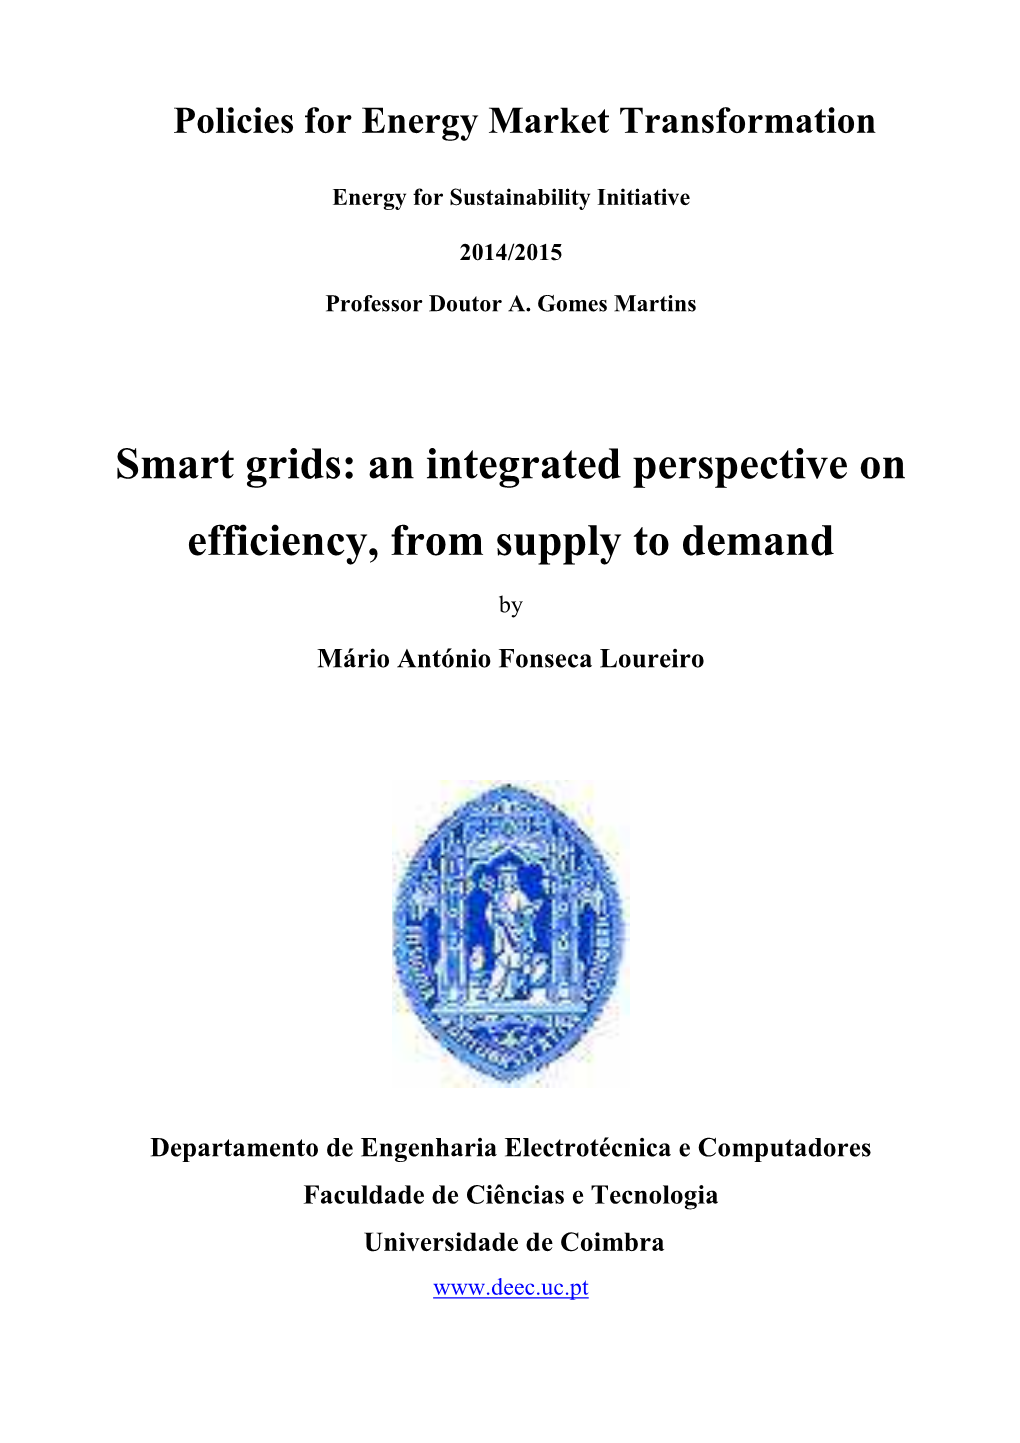 Smart Grids: an Integrated Perspective on Efficiency, from Supply to Demand